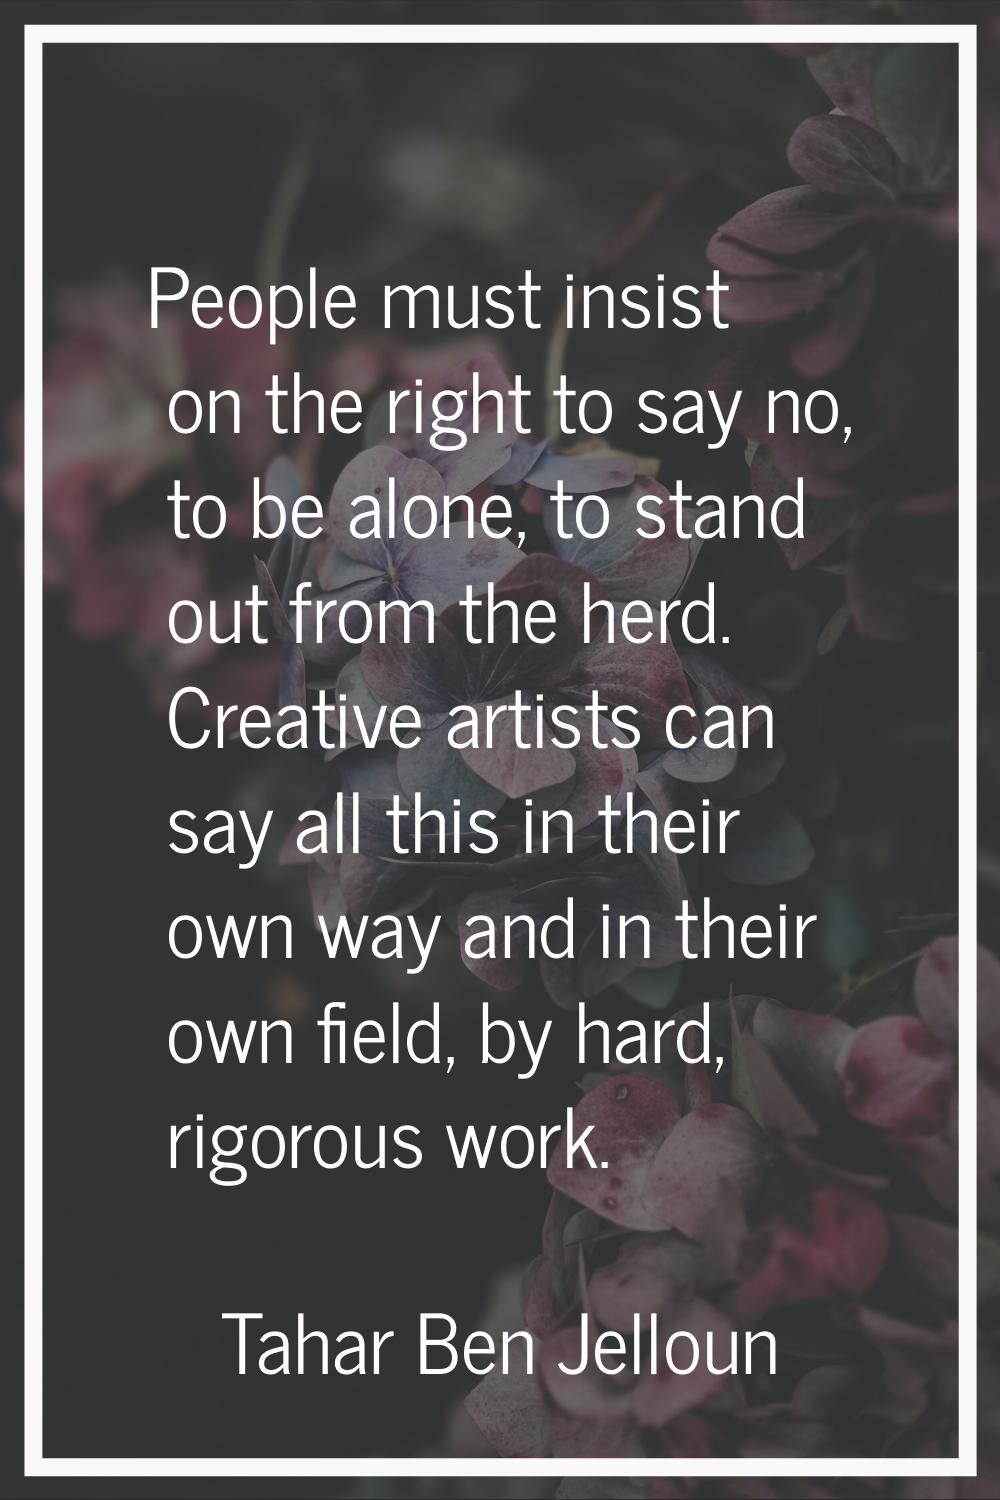 People must insist on the right to say no, to be alone, to stand out from the herd. Creative artist